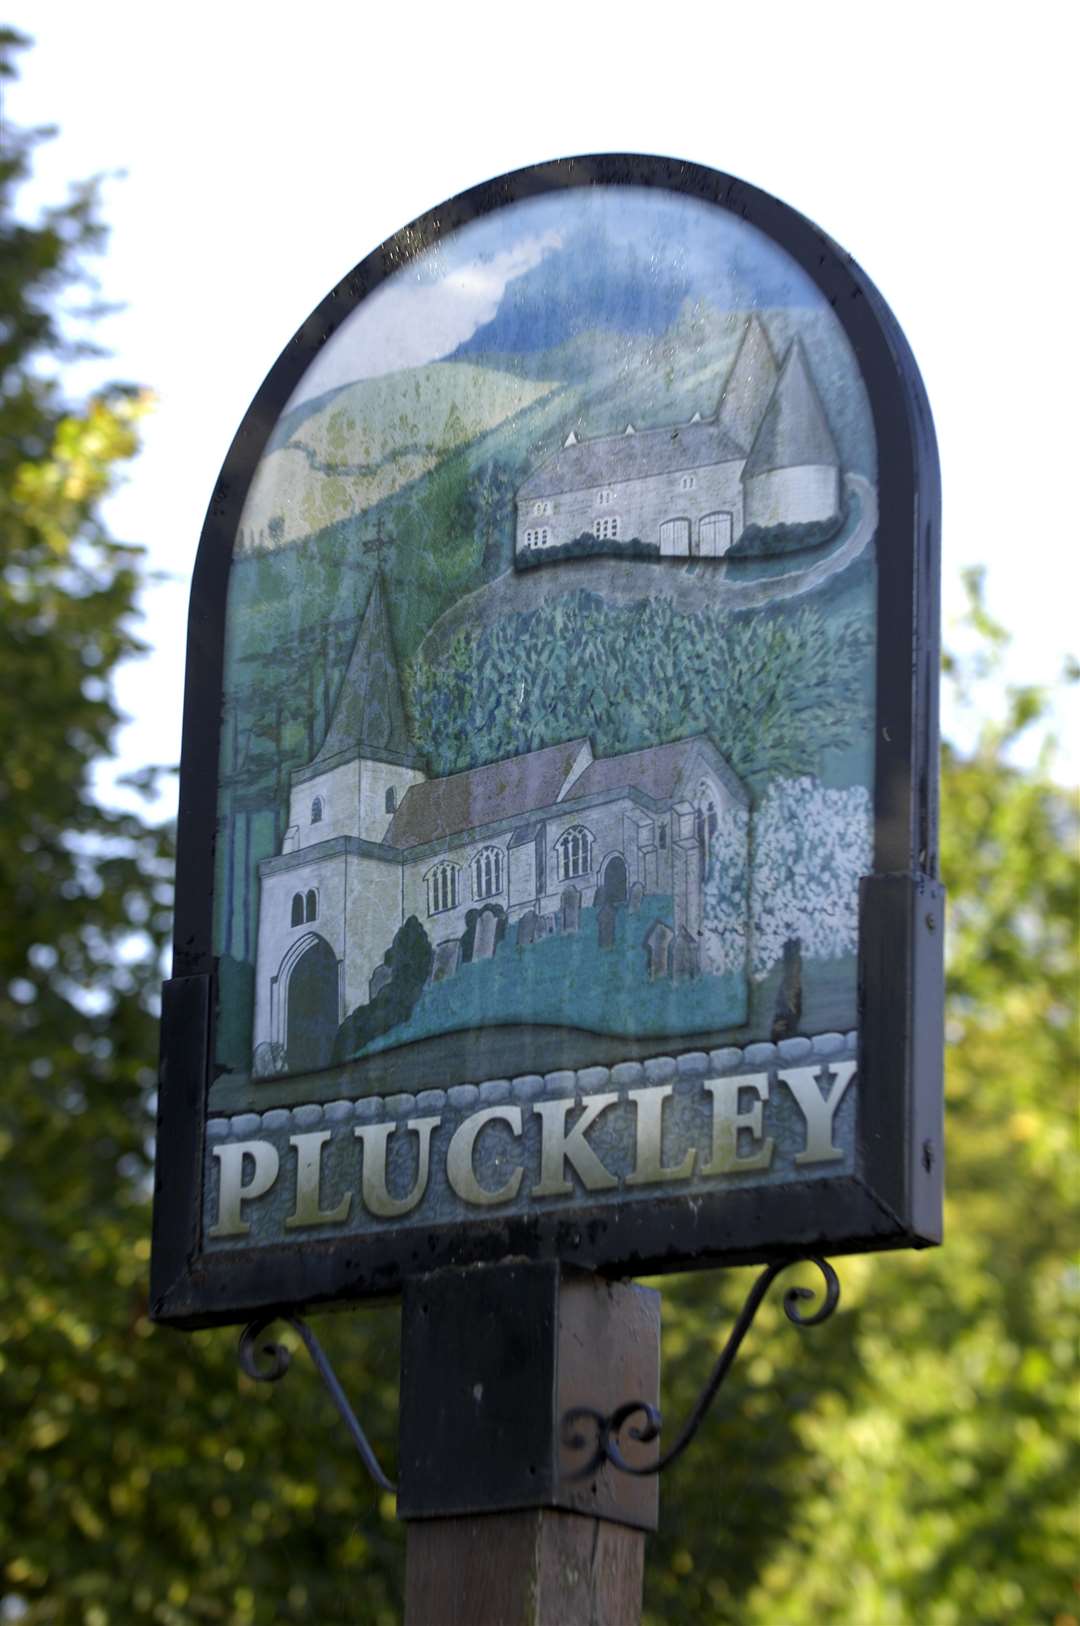 Pluckley village is meant to be the most haunted in the UK